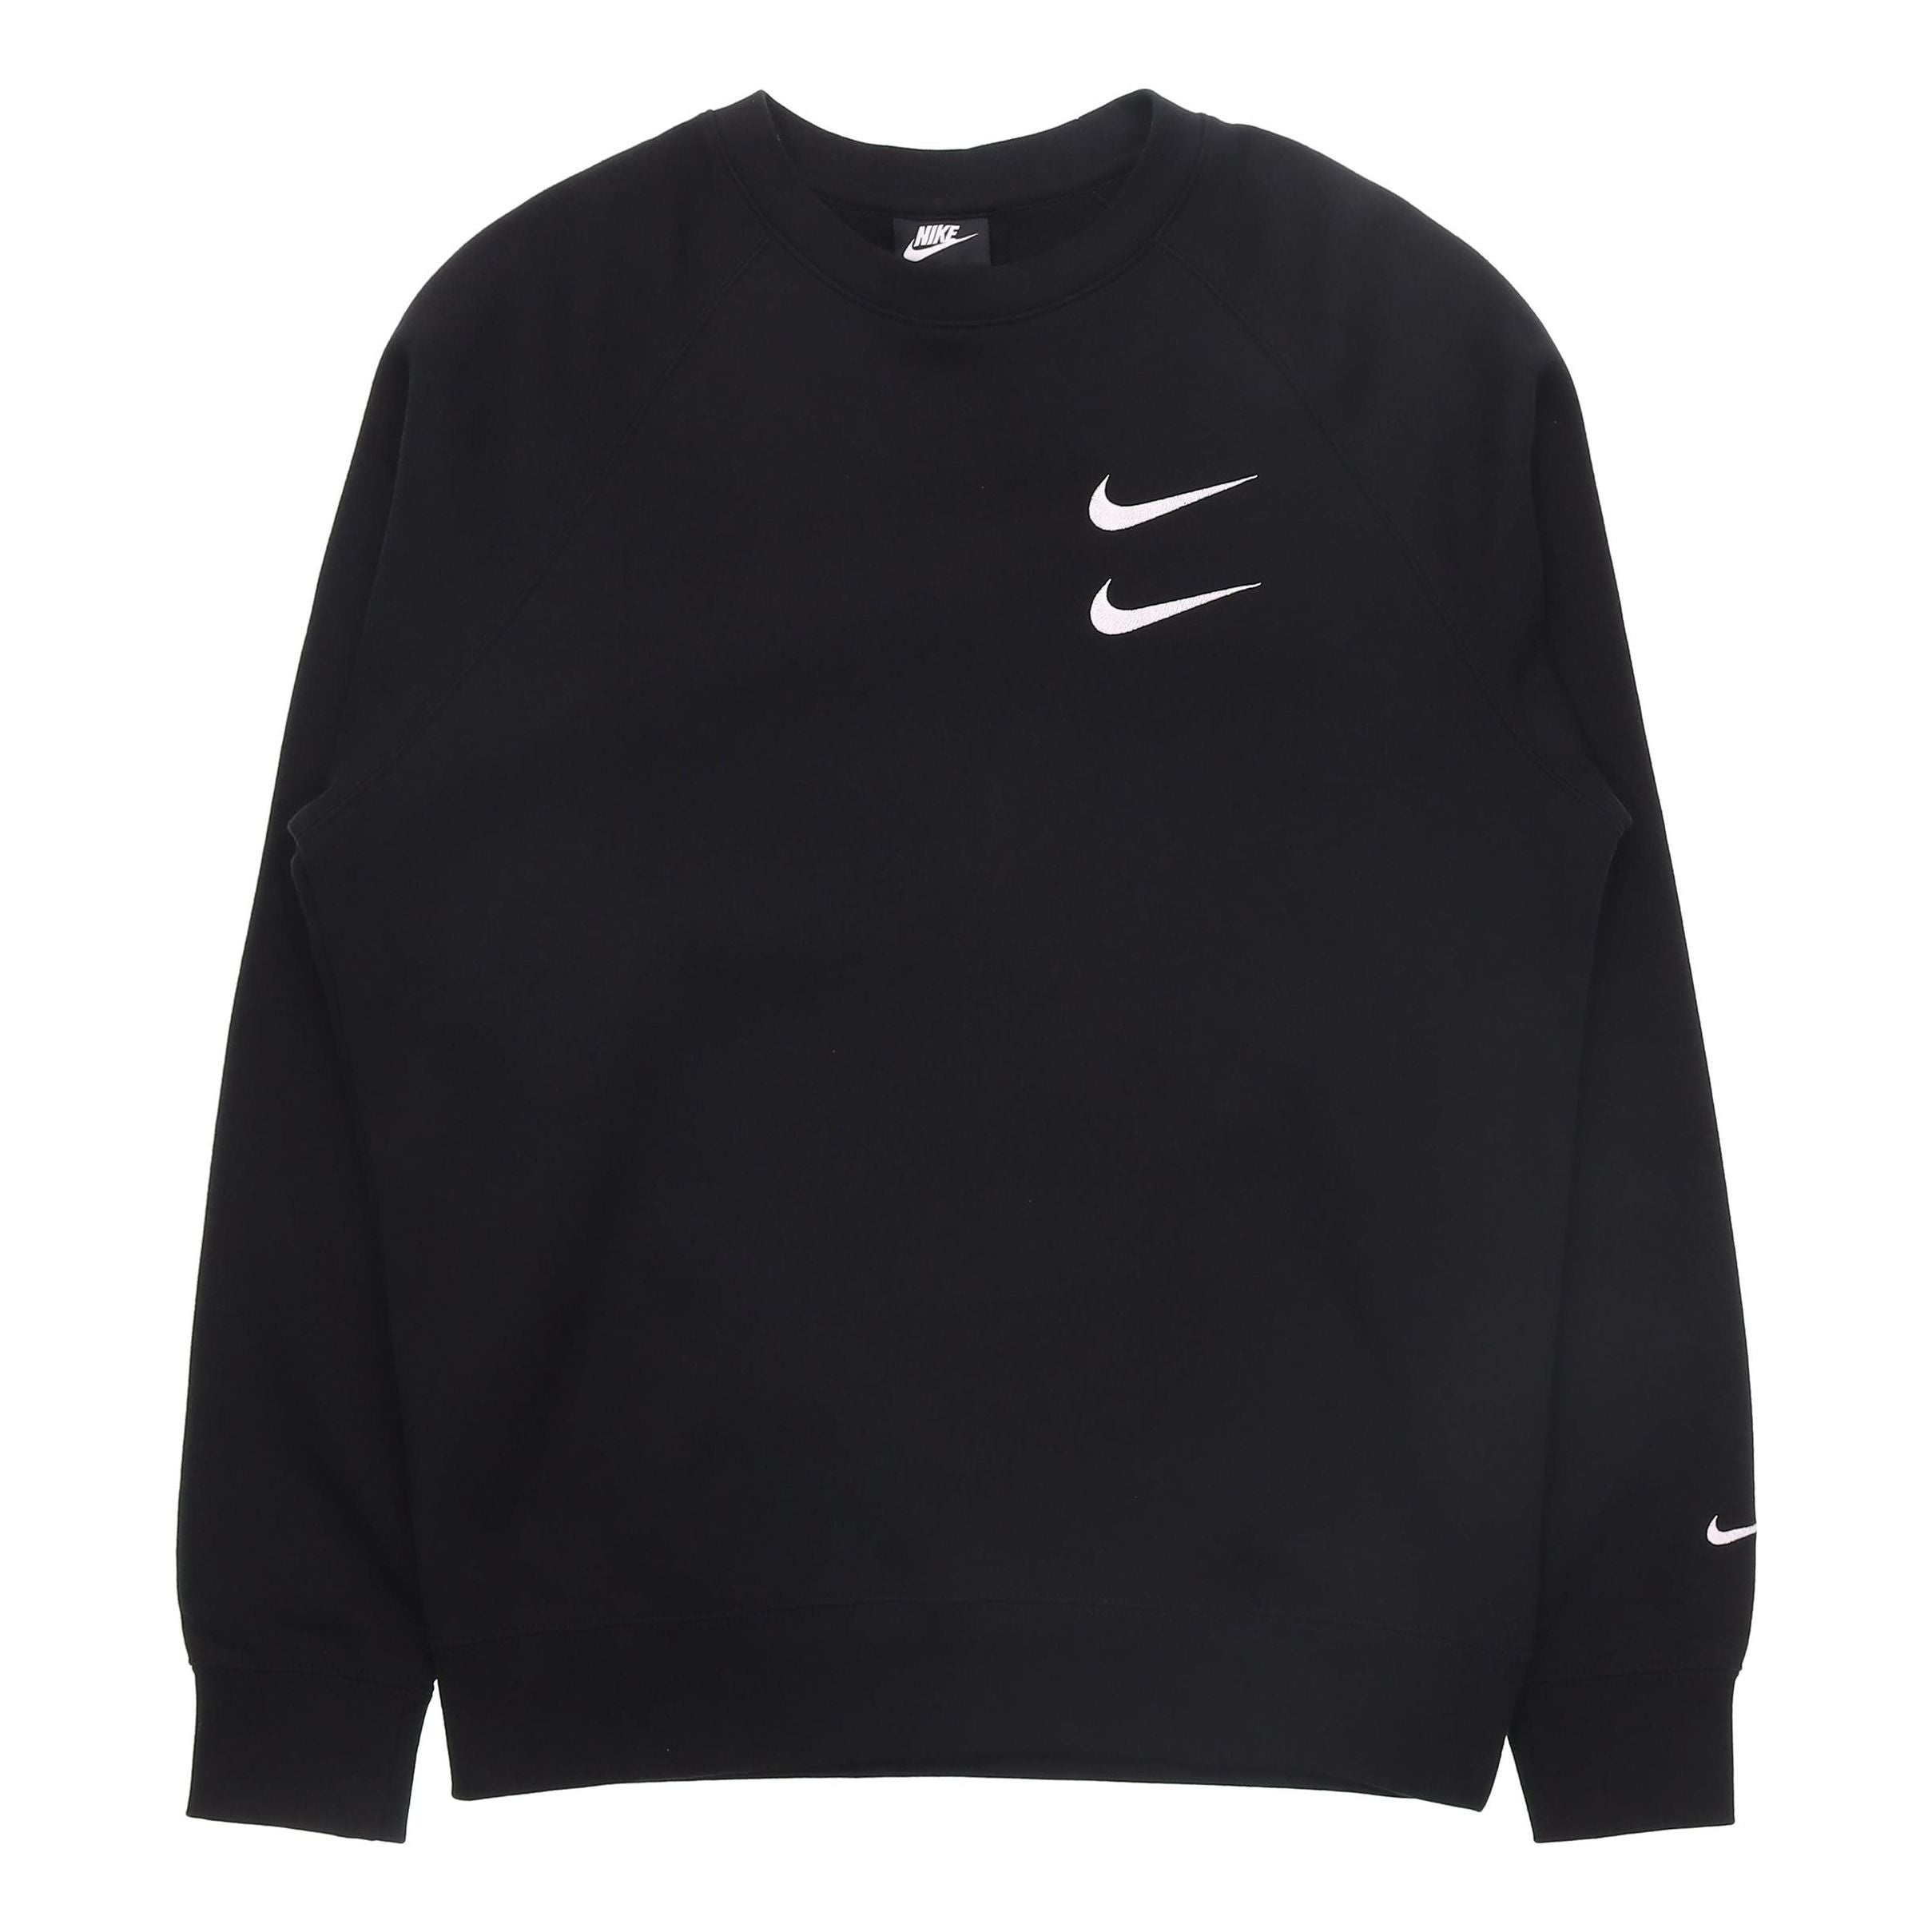 Nike Embroidered Fleece Lined Stay Warm Round Neck Pullover Black DD5079-010 - 1